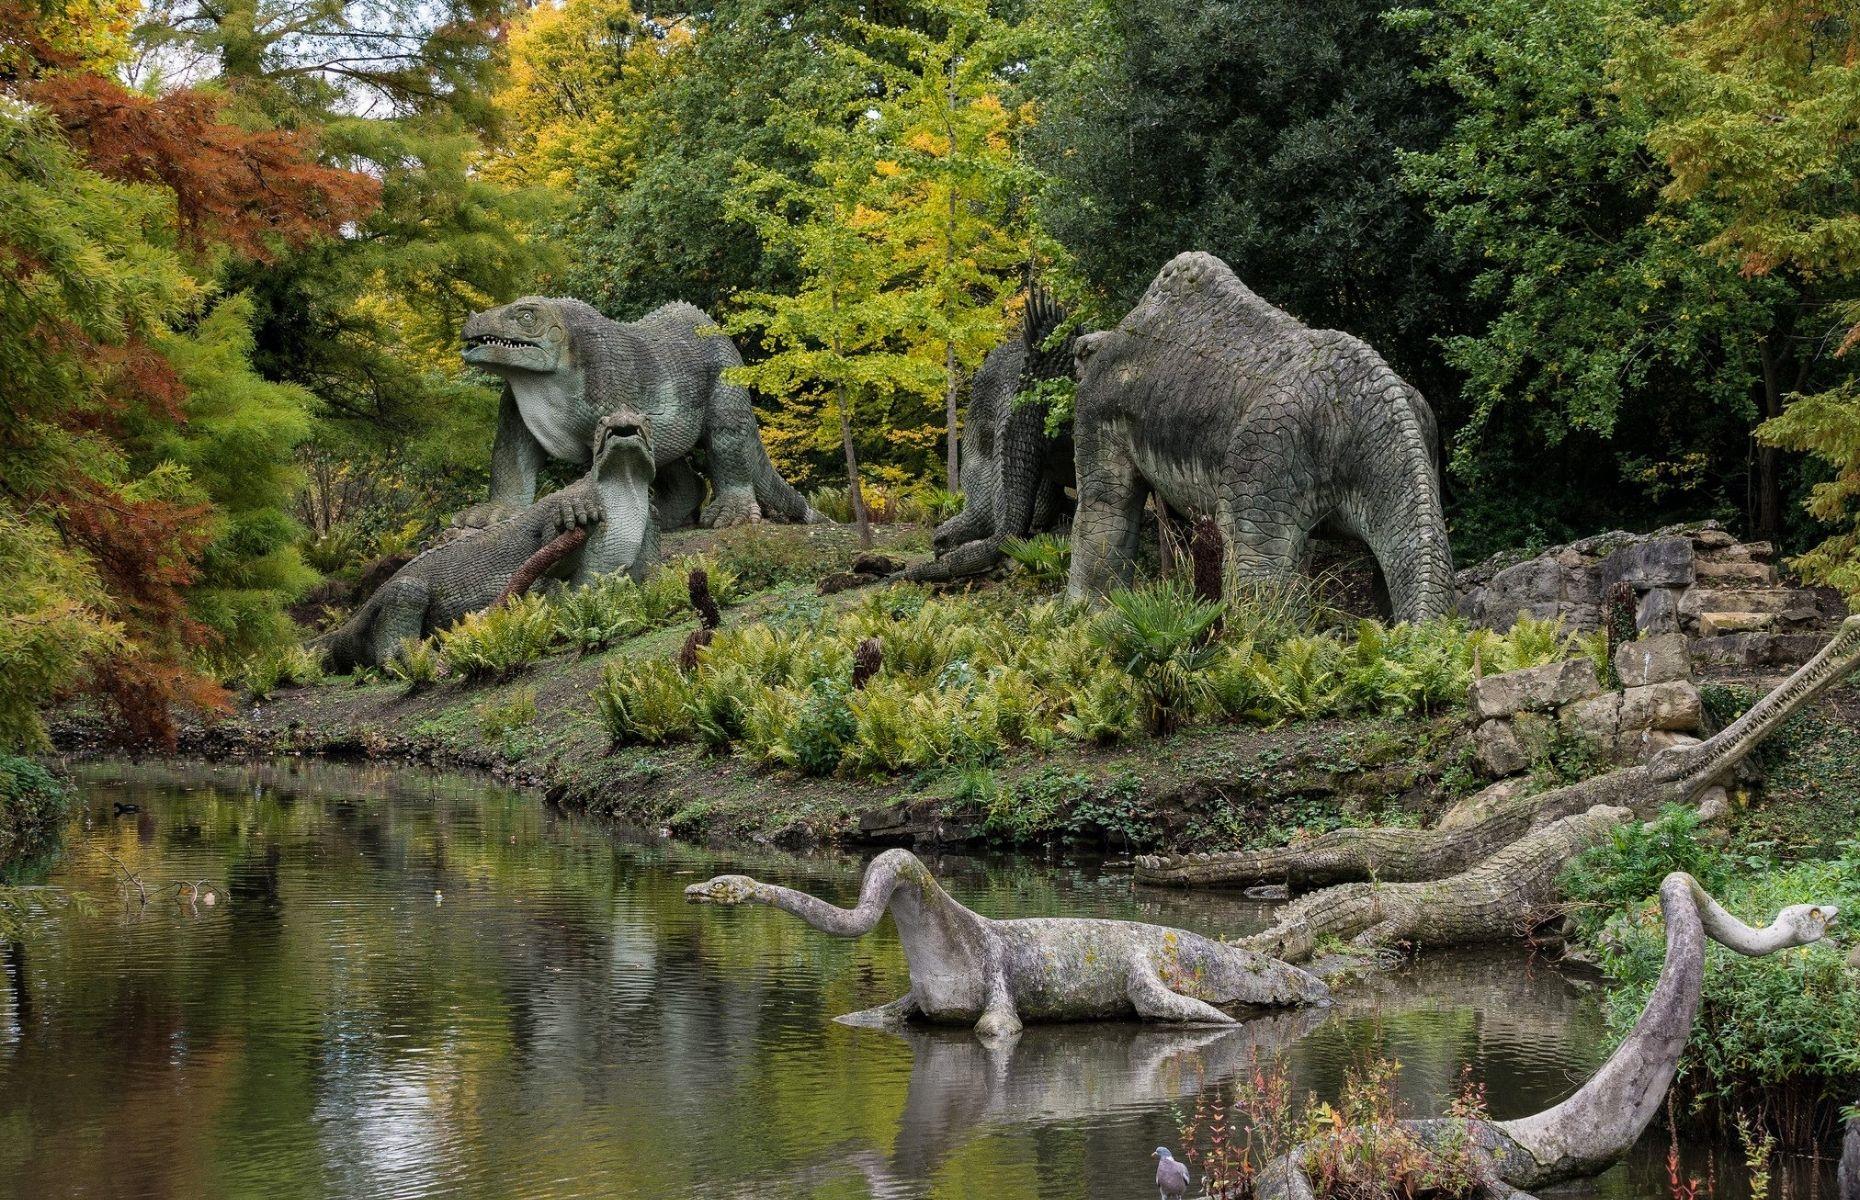 <p>An important part of Victorian history, the dinosaur sculptures in <a href="https://cpdinosaurs.org/">Crystal Palace Park</a> have been in situ since 1854. The large-scale installations were created by Benjamin Waterhouse Hawkins, a natural history sculptor, and it's reputed that Queen Victoria visited the site numerous times. Despite only a handful of more than 30 statues being technically accurate, this fun-filled and historic park represents the world's first ever attempt to model these incredible extinct creatures.</p>